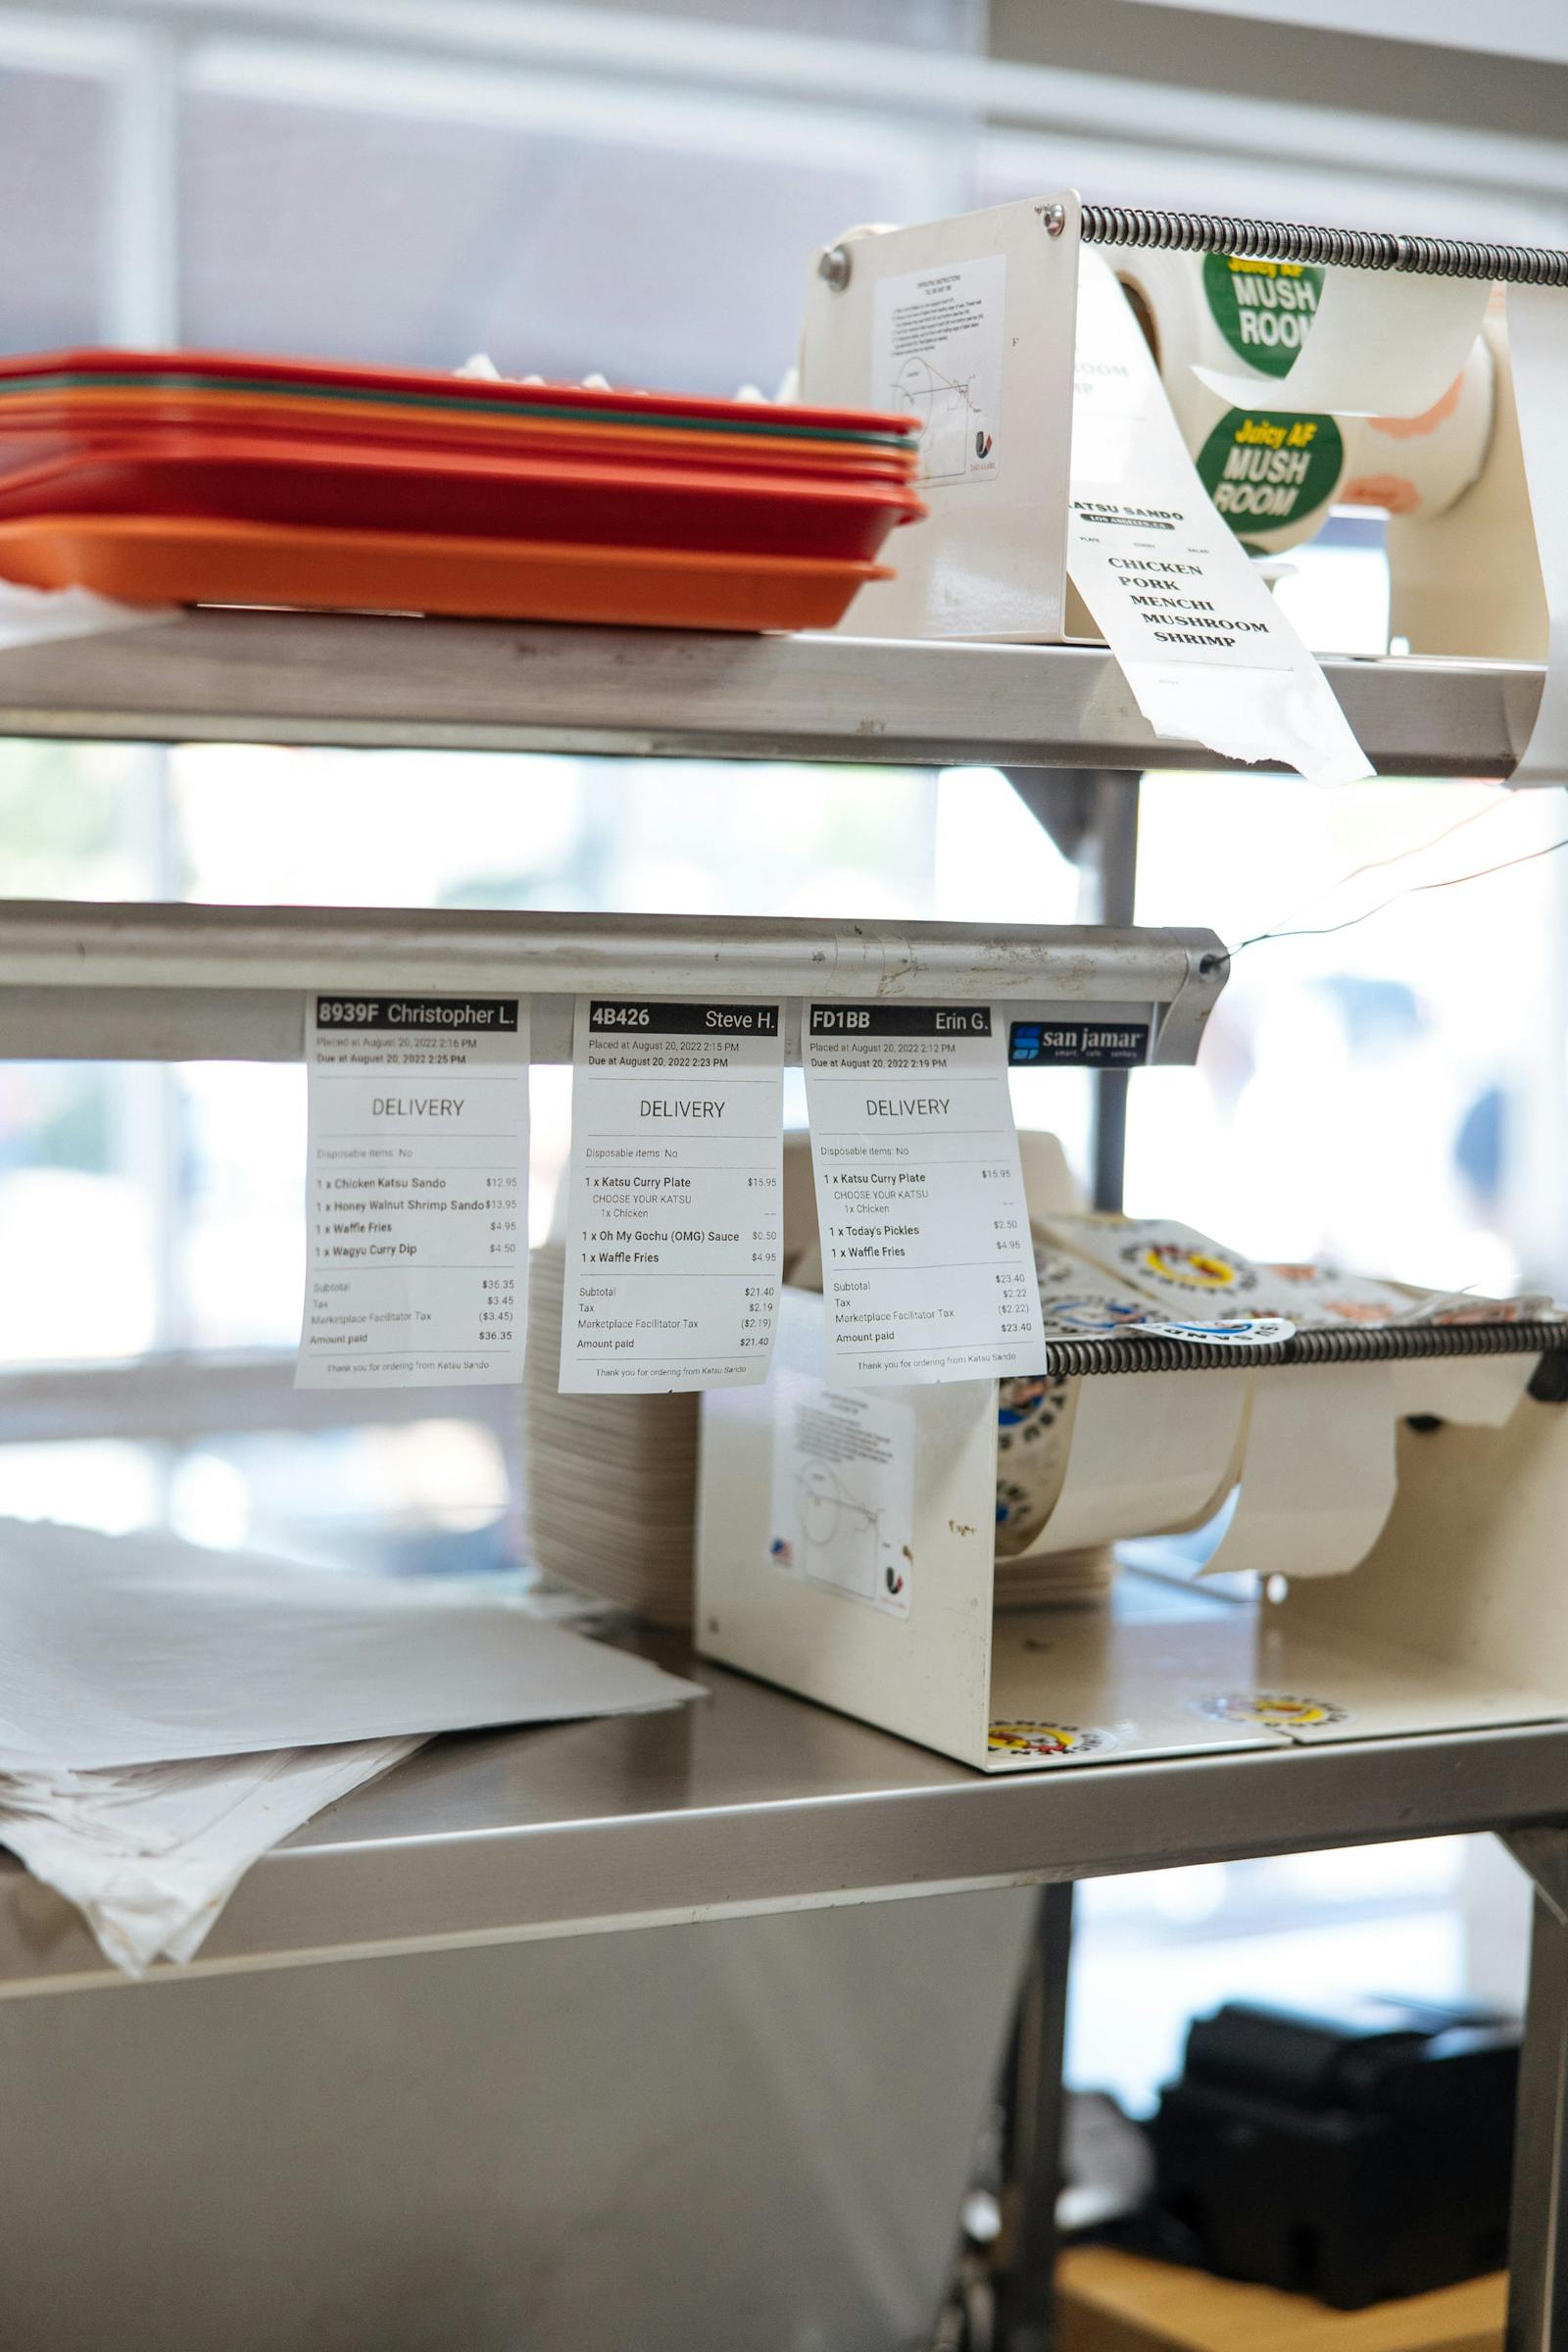 Image of restaurant order tickets hanging that were printed from the POS system